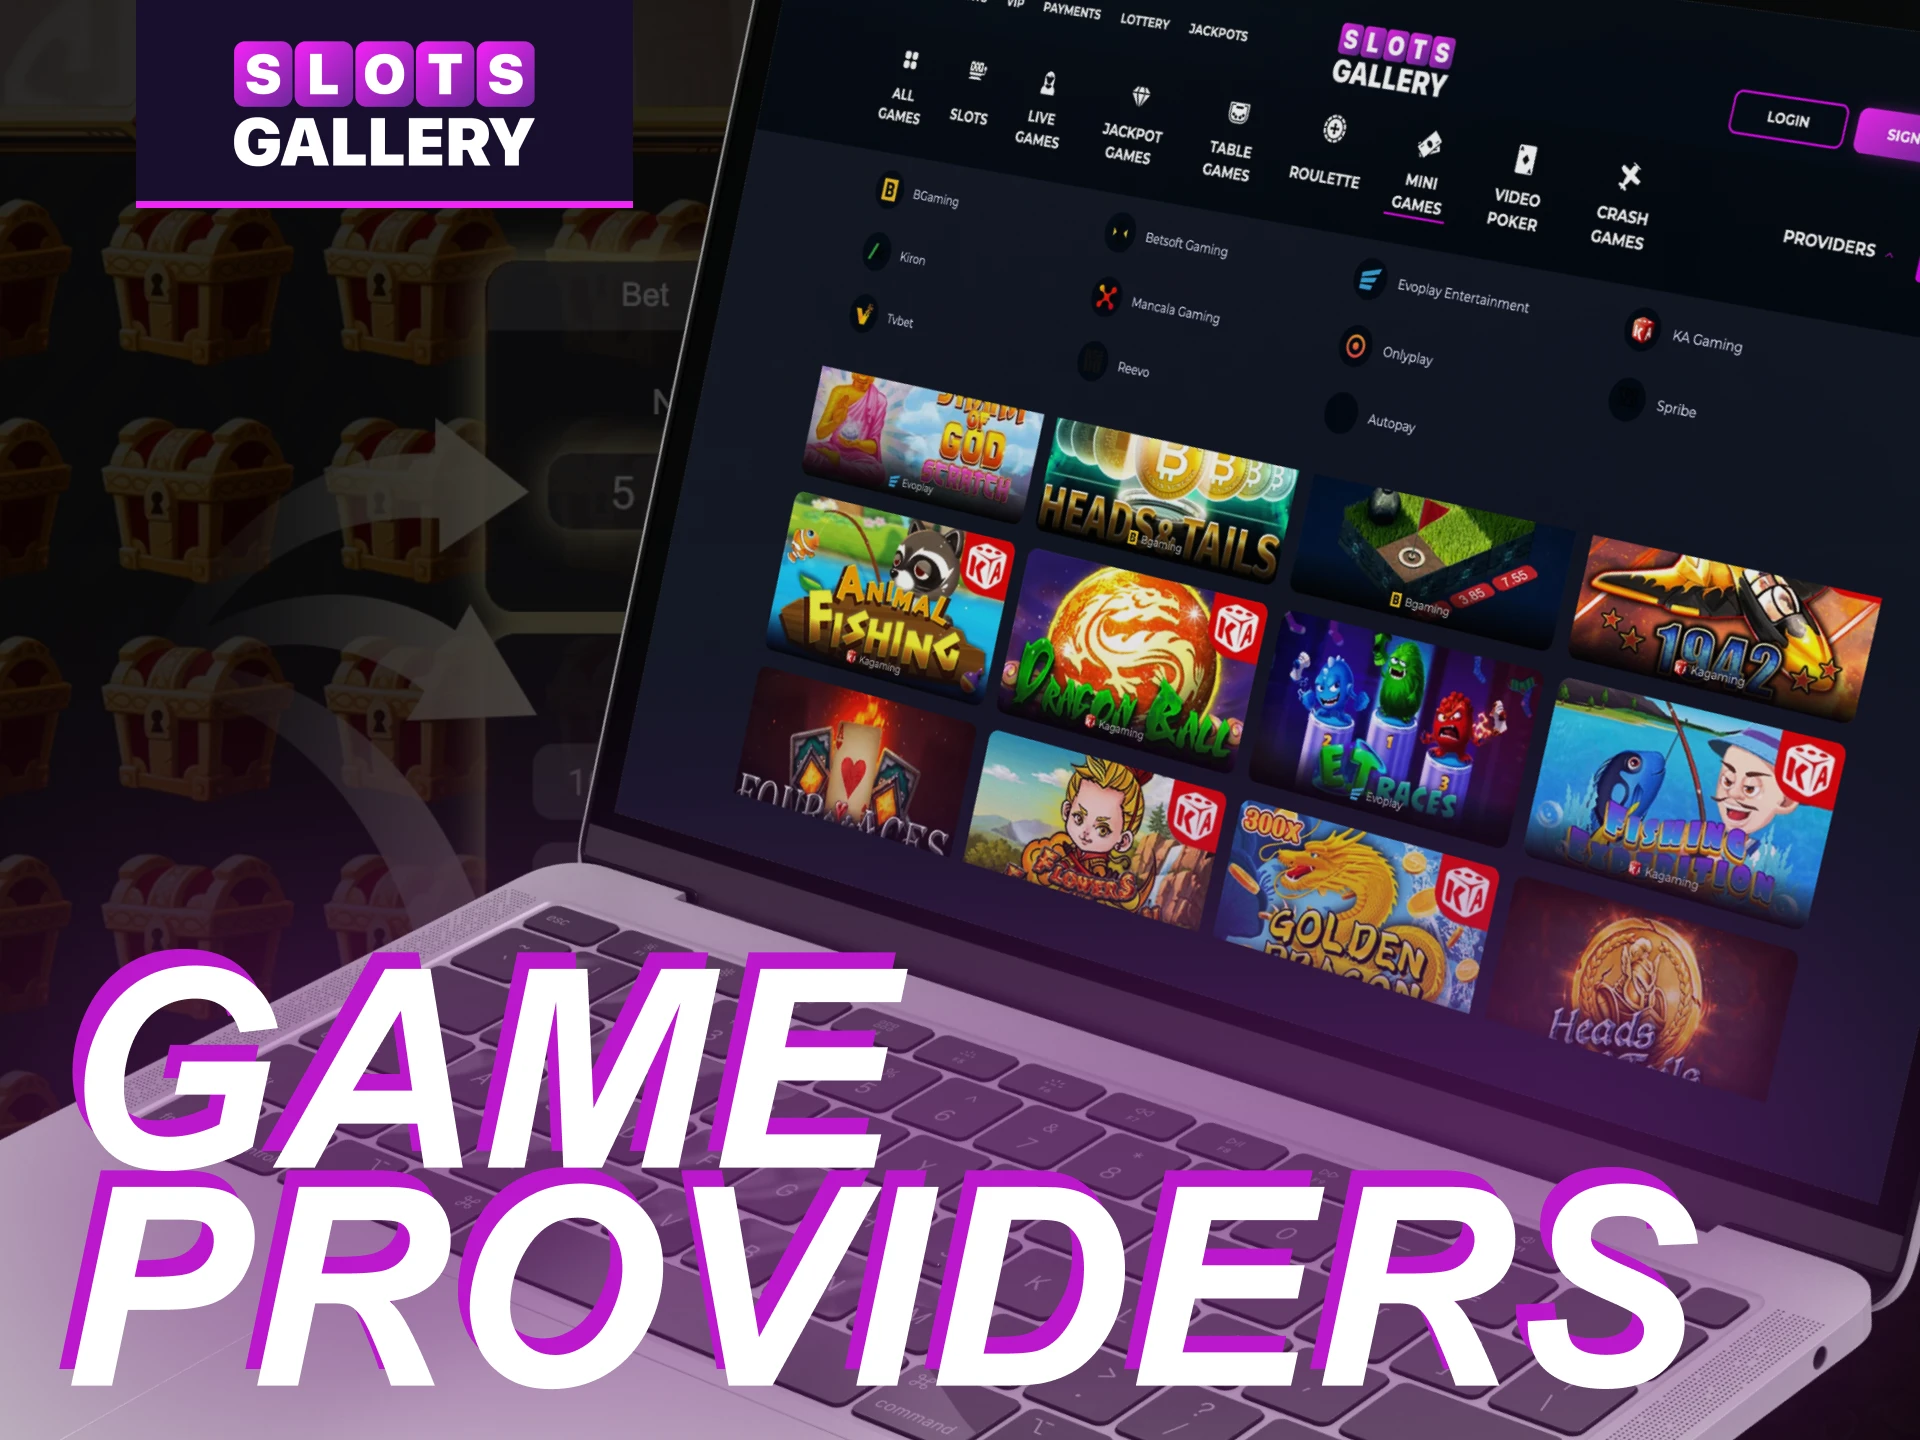 Who provides mini games in the online casino Slots Gallery.